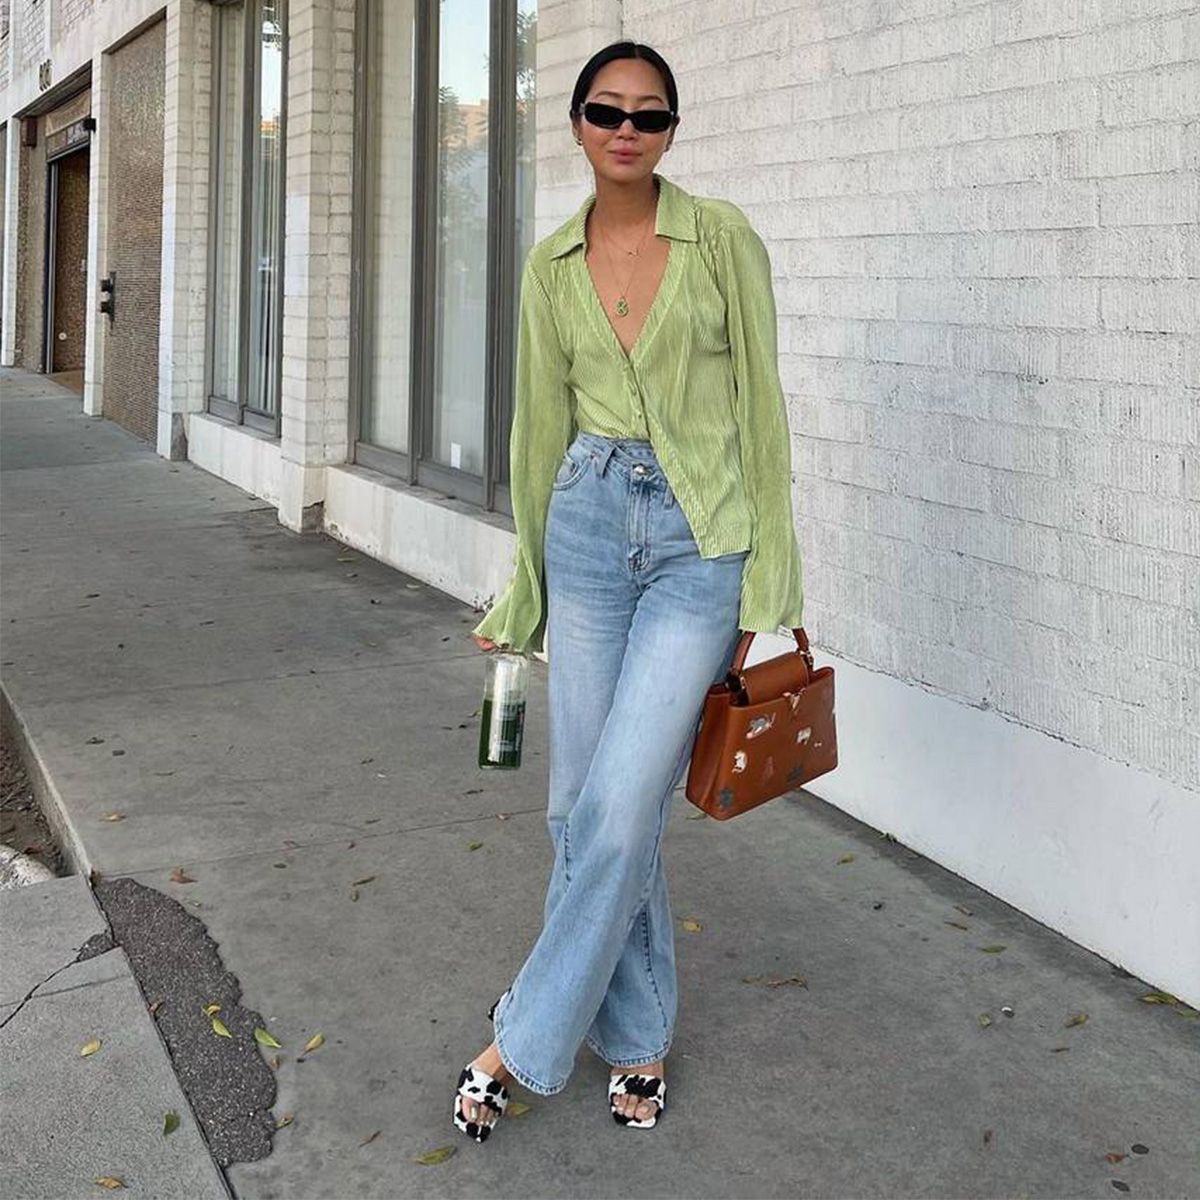 This '70s Jeans Trend Is Controversial for Short Women, But I'm Trying It